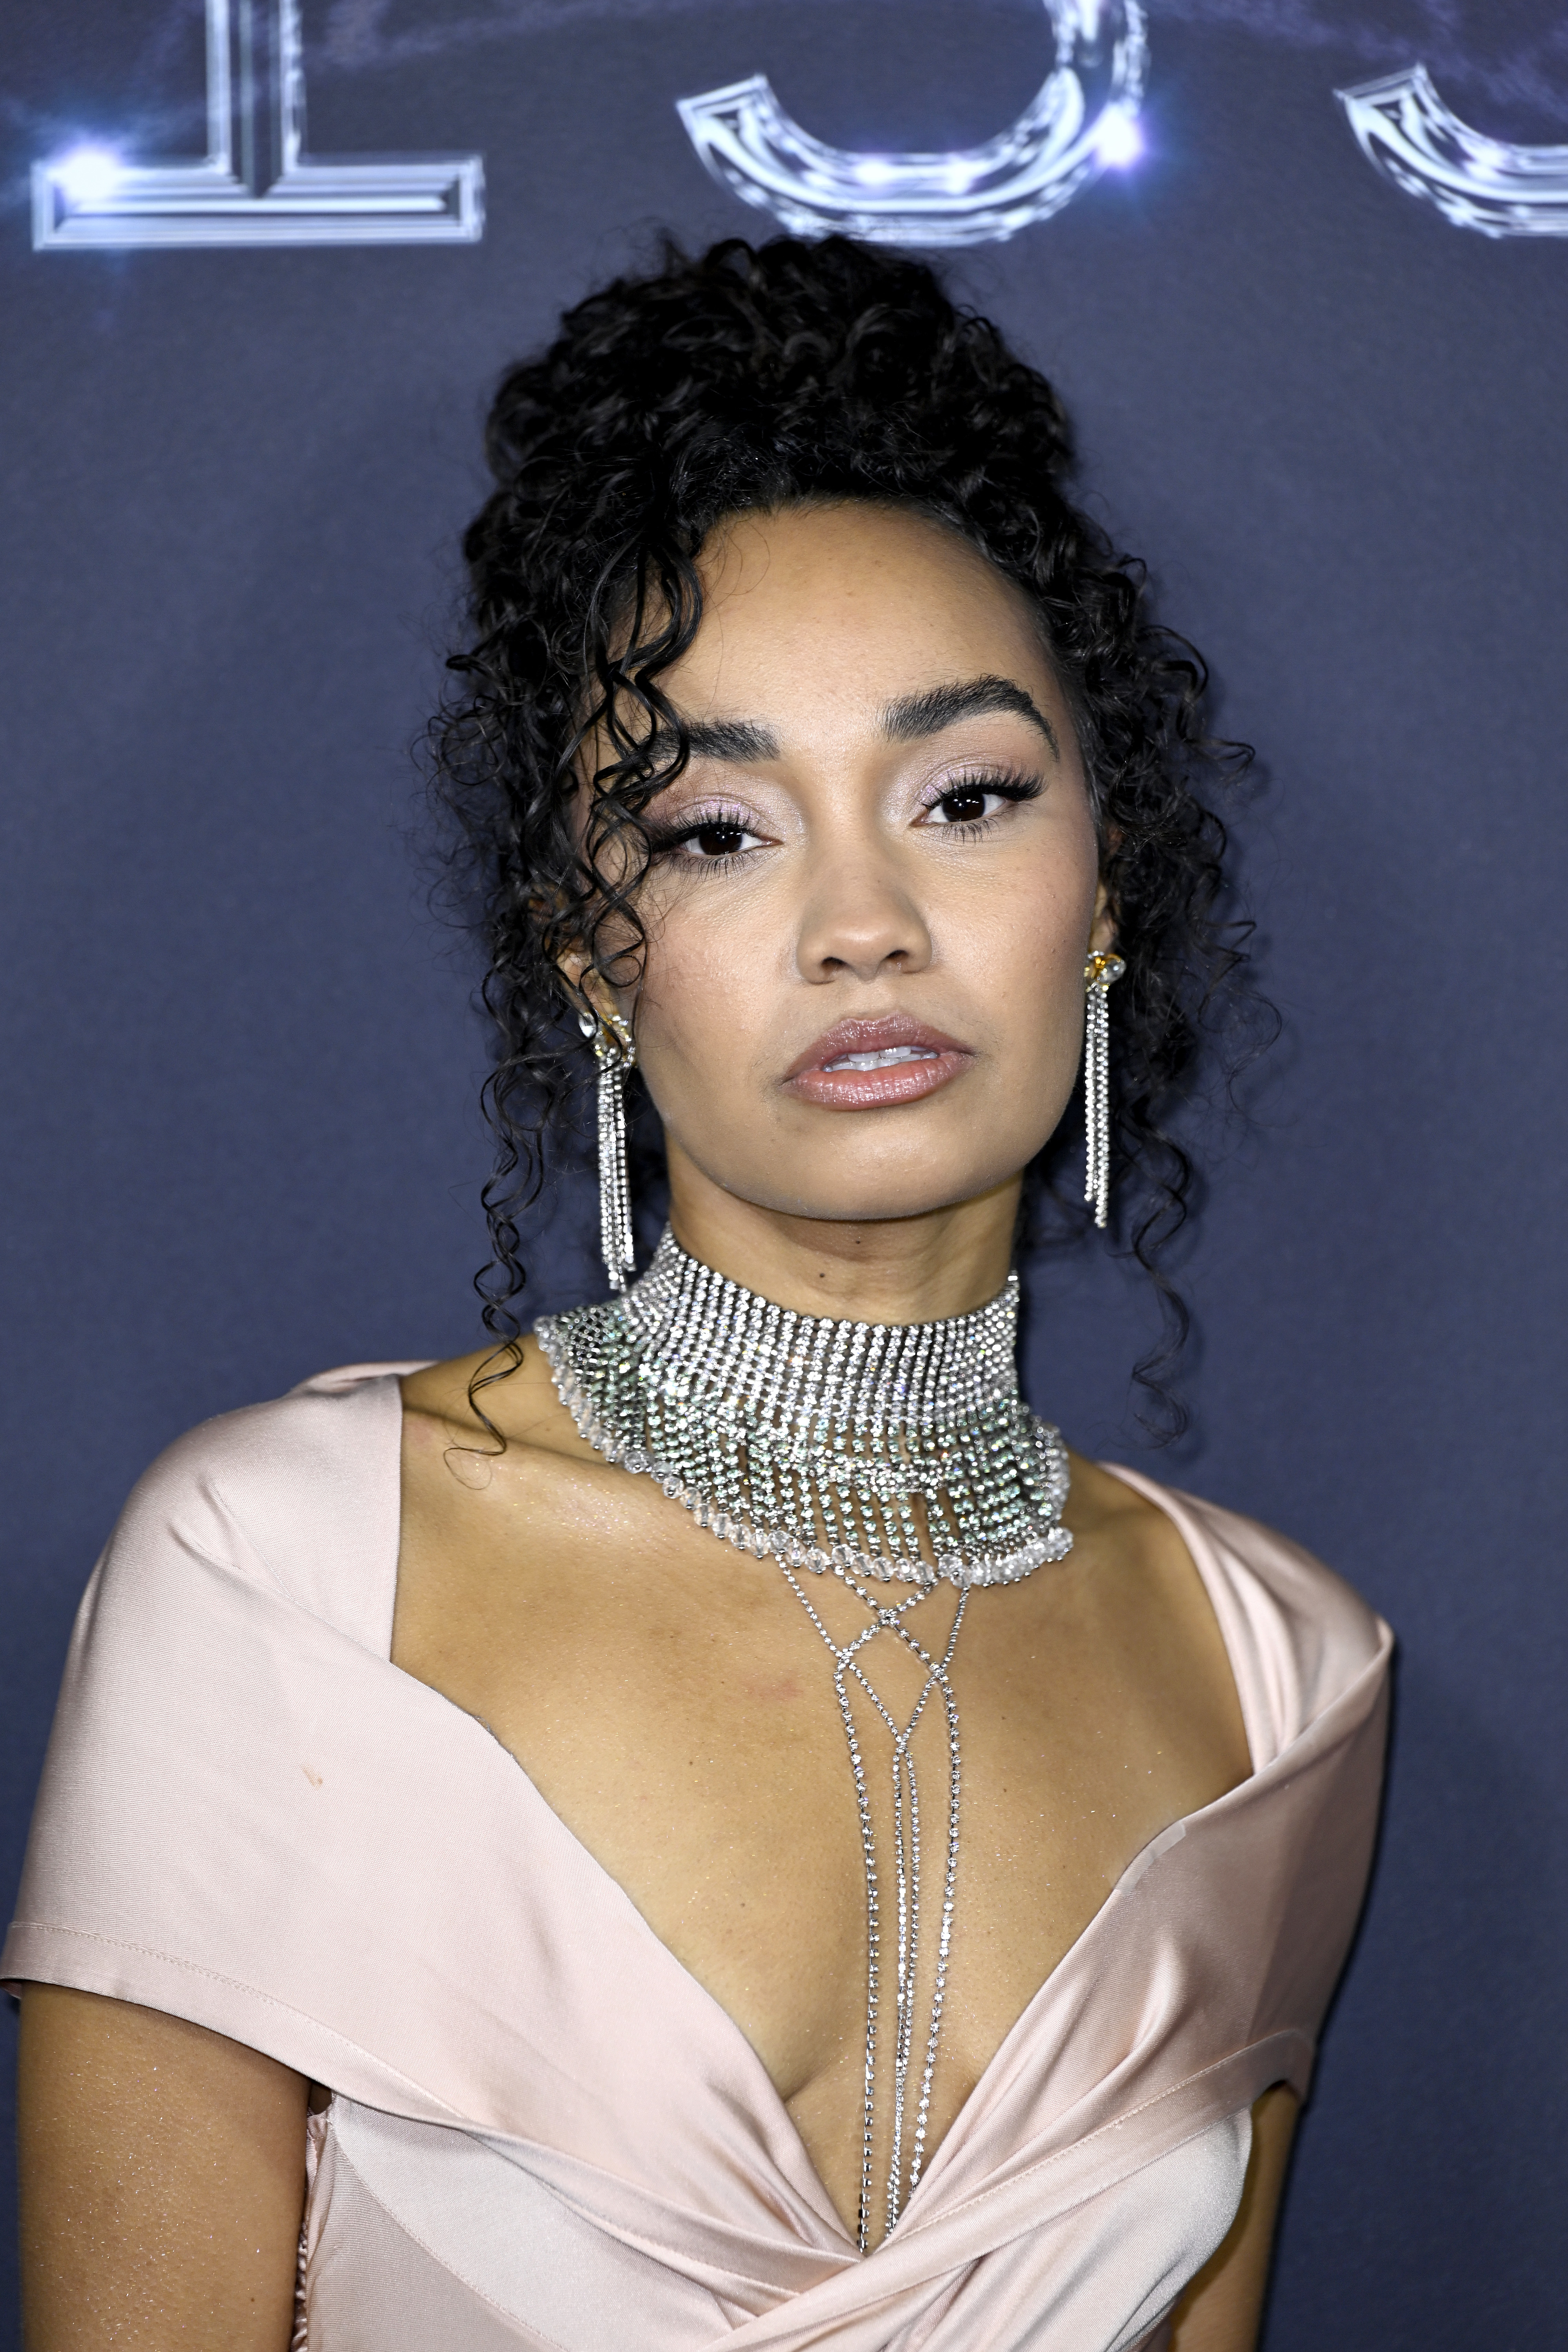 Leigh-Anne in a pink off-the-shoulder outfit and thick bejeweled choker and earrings